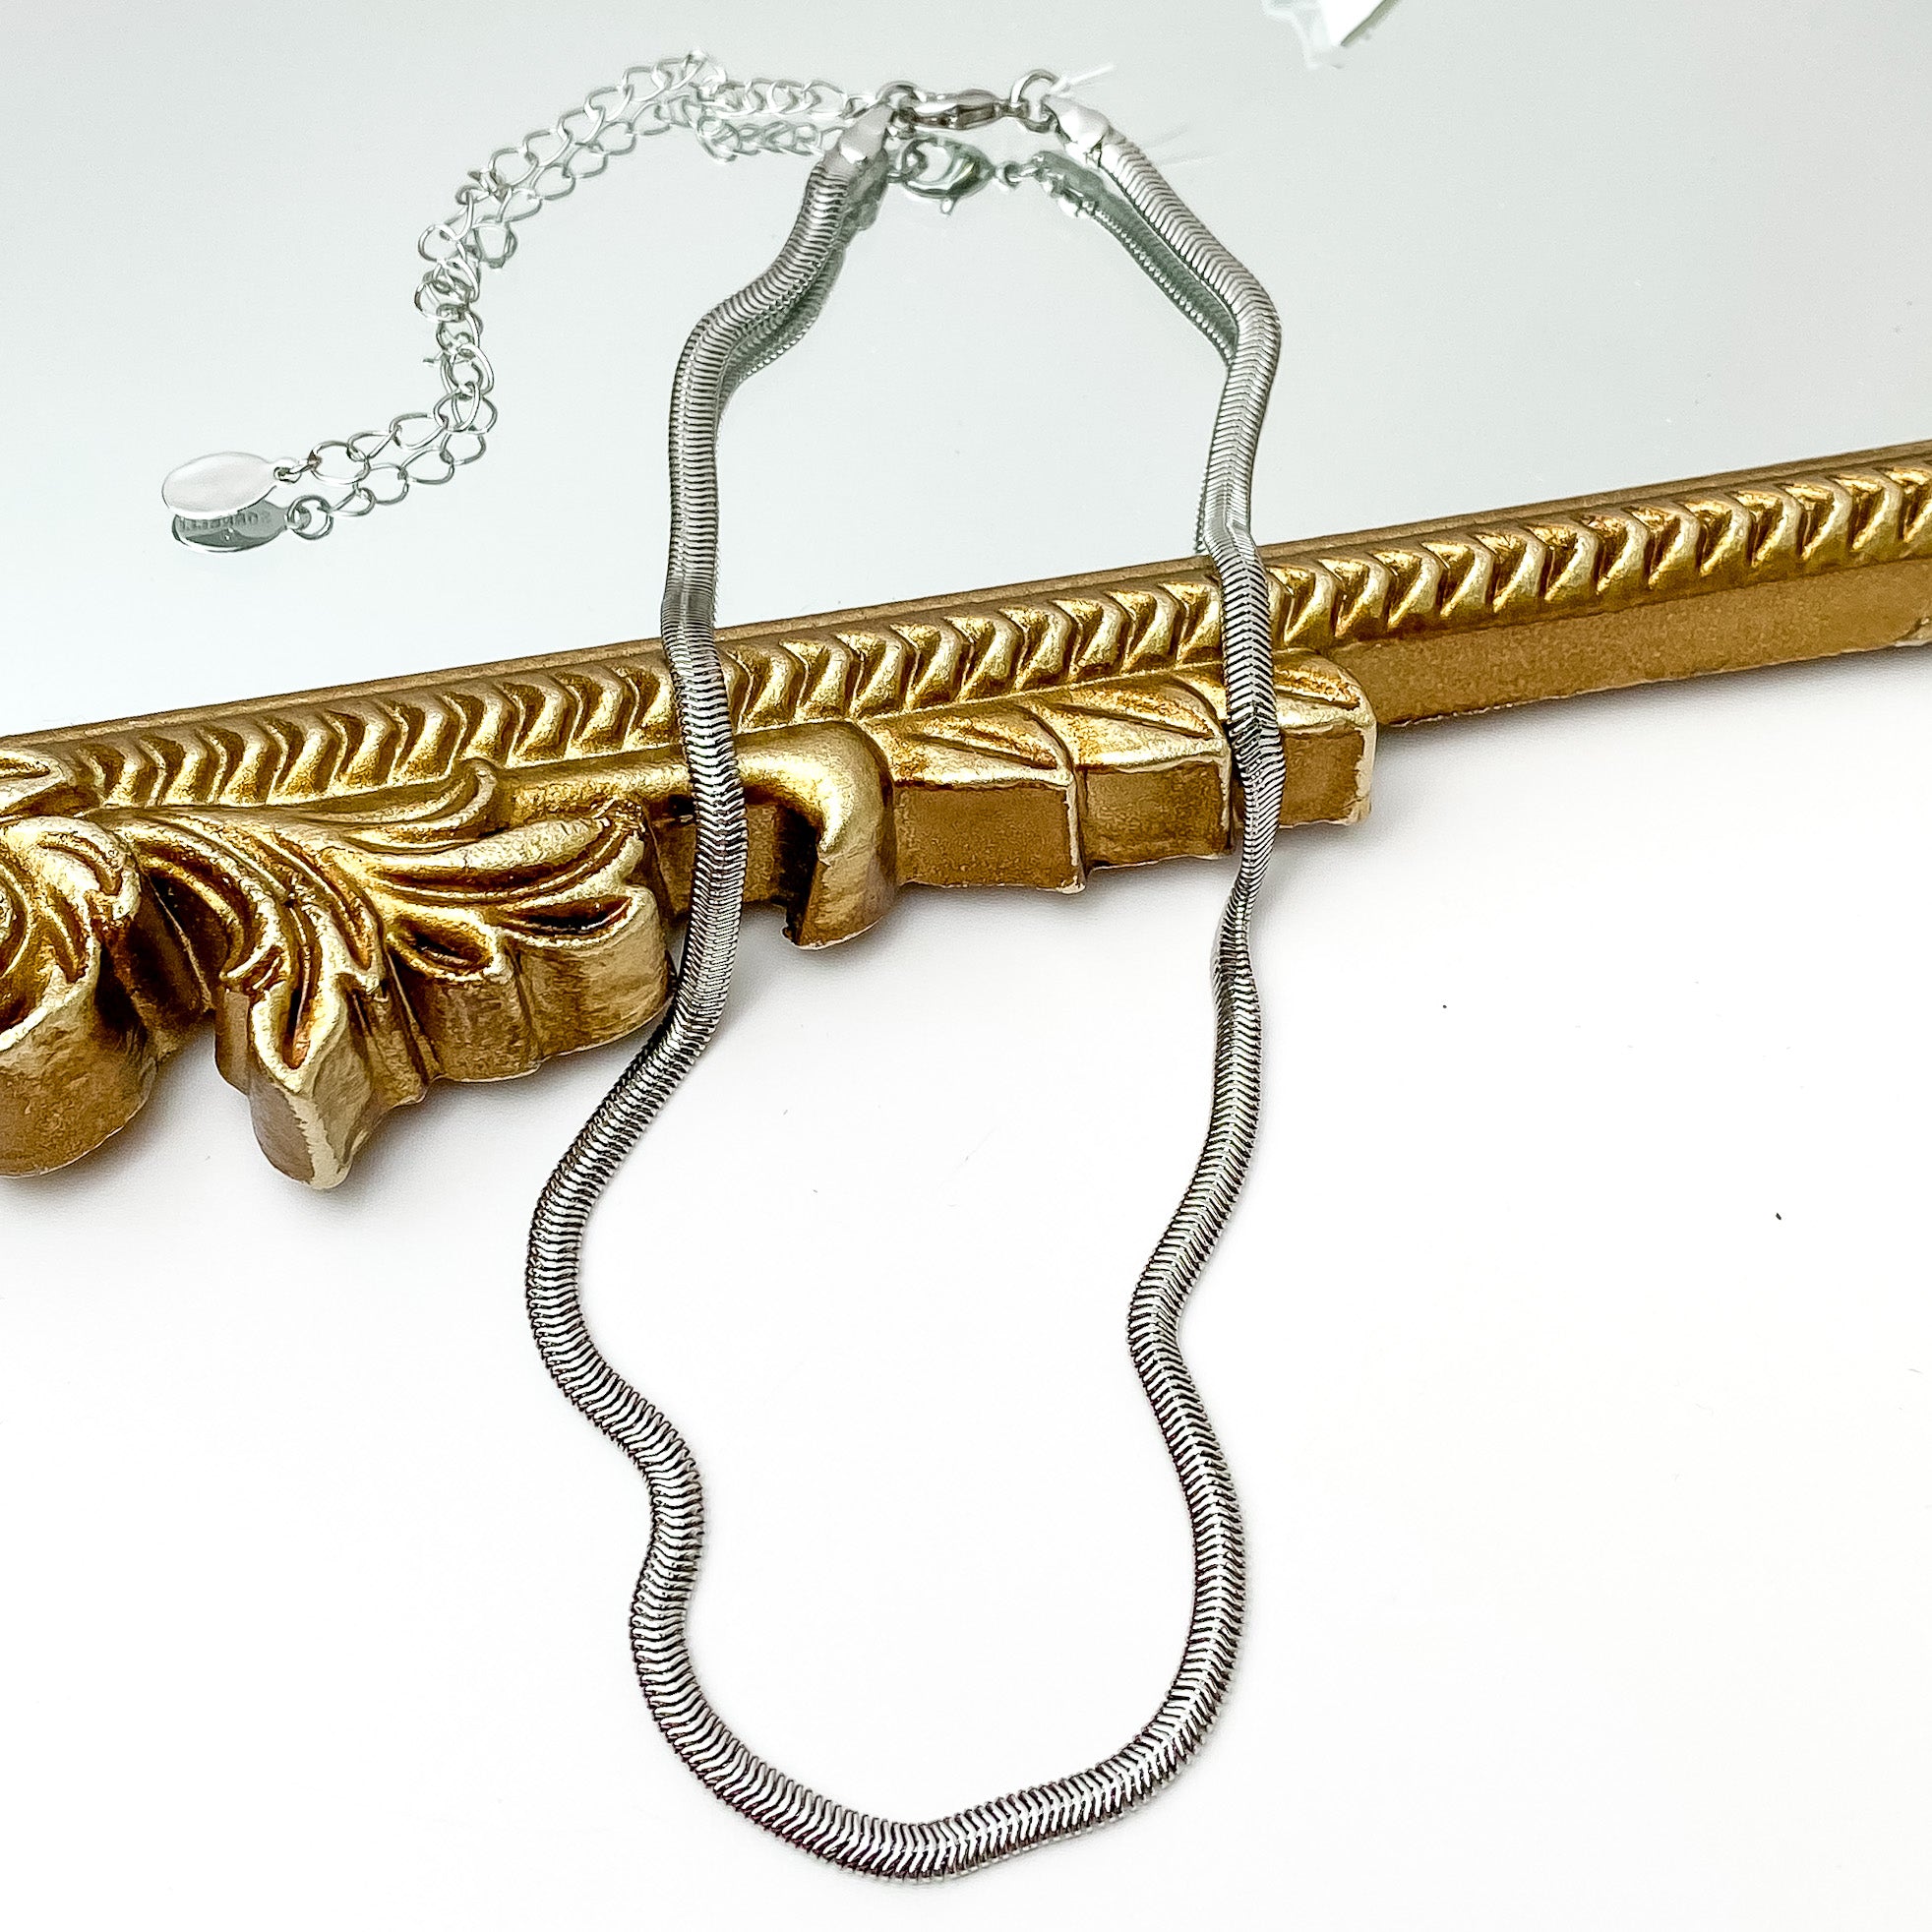 Silver herringbone chain necklace. This necklace is pictured laying partially on a gold mirror on a white background.   